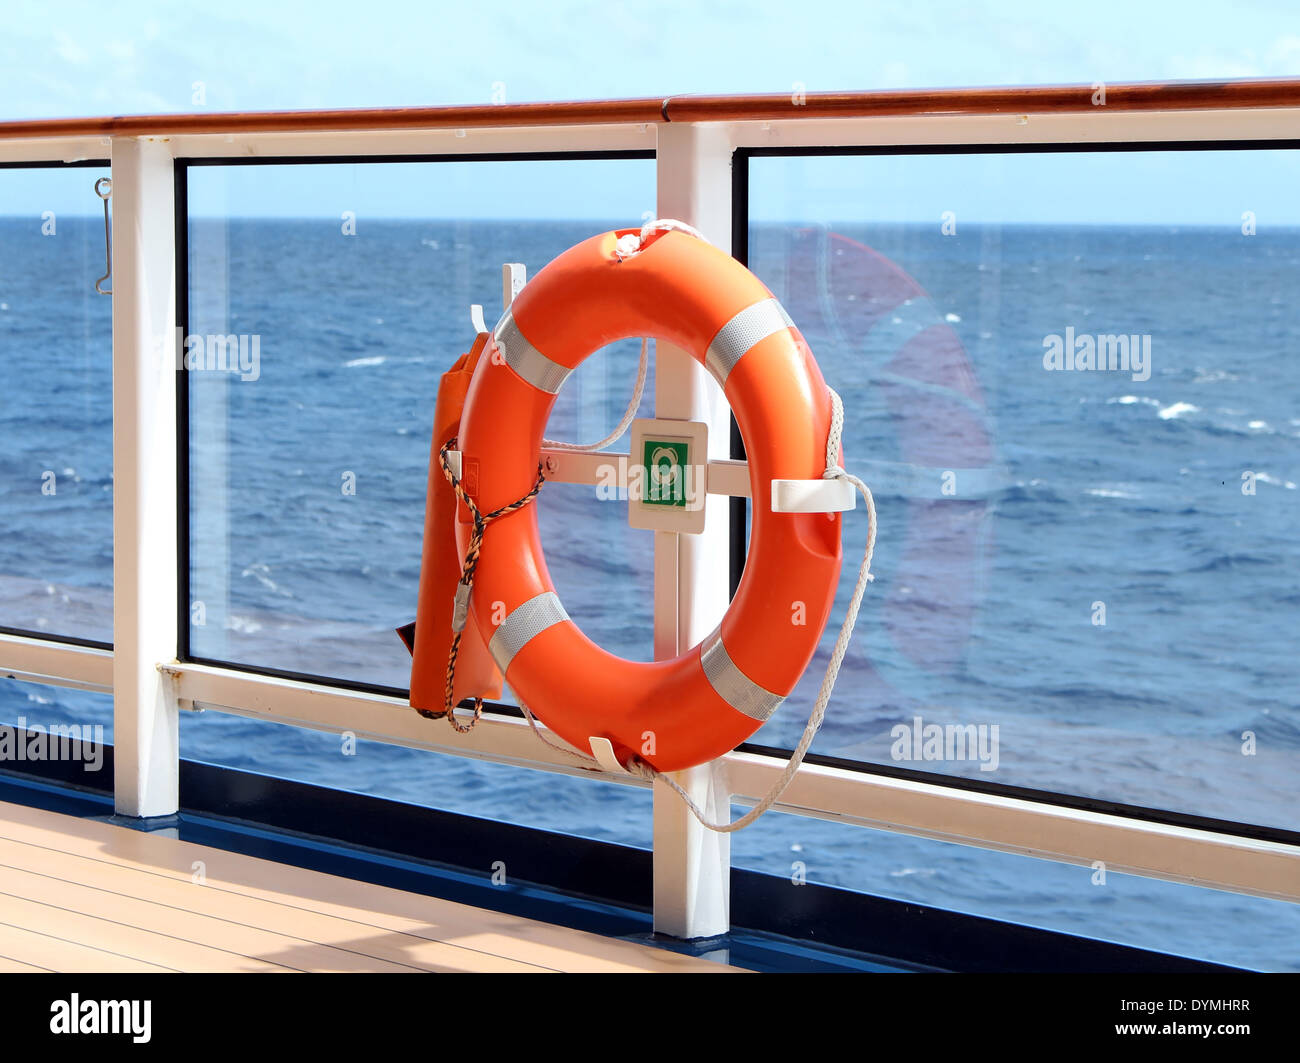 An orange lifesaver on the deck of a cruise ship Stock Photo